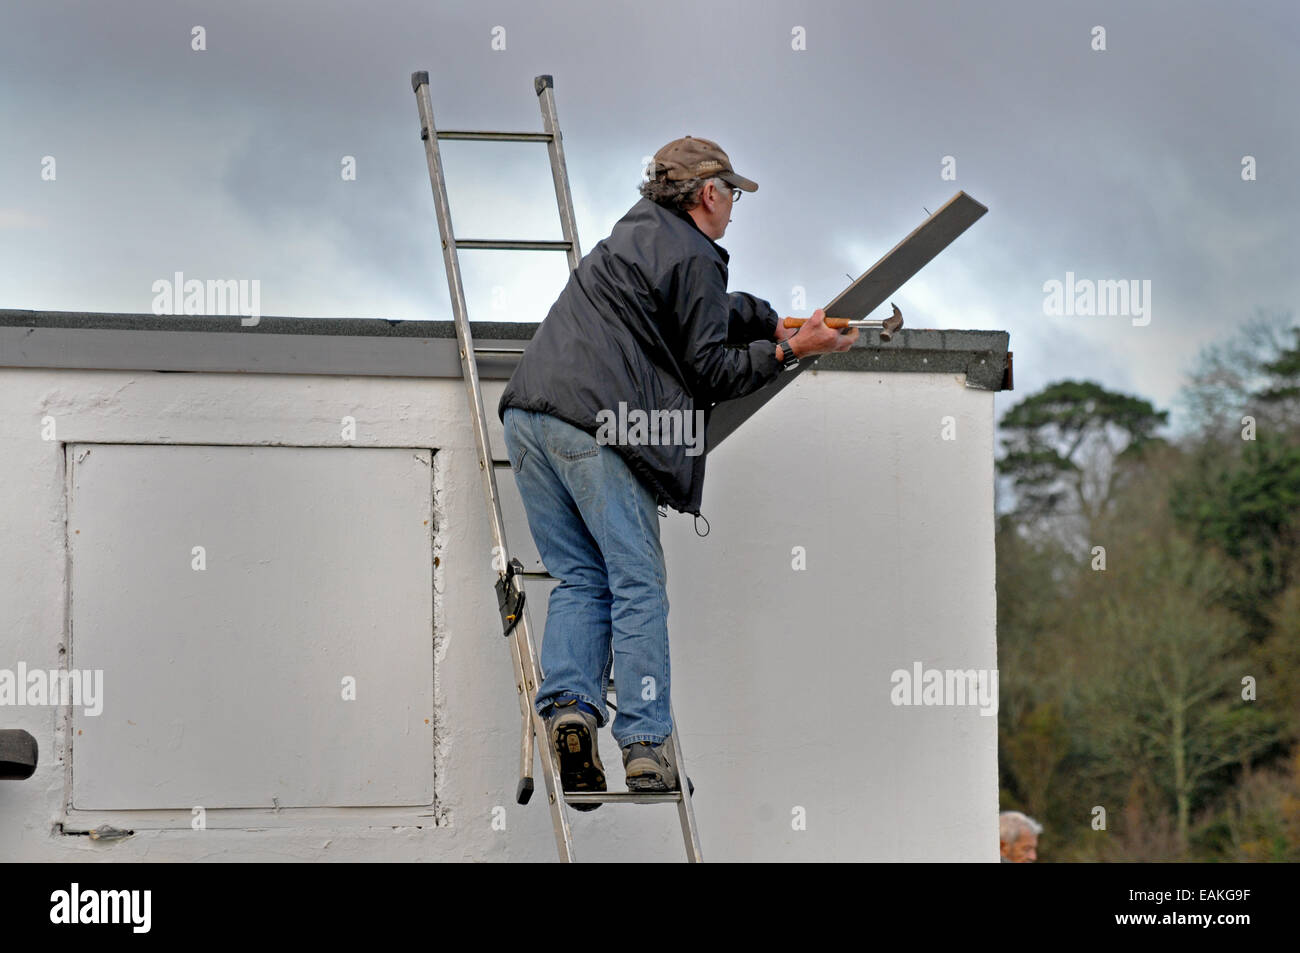 A man repairing a roof Stock Photo